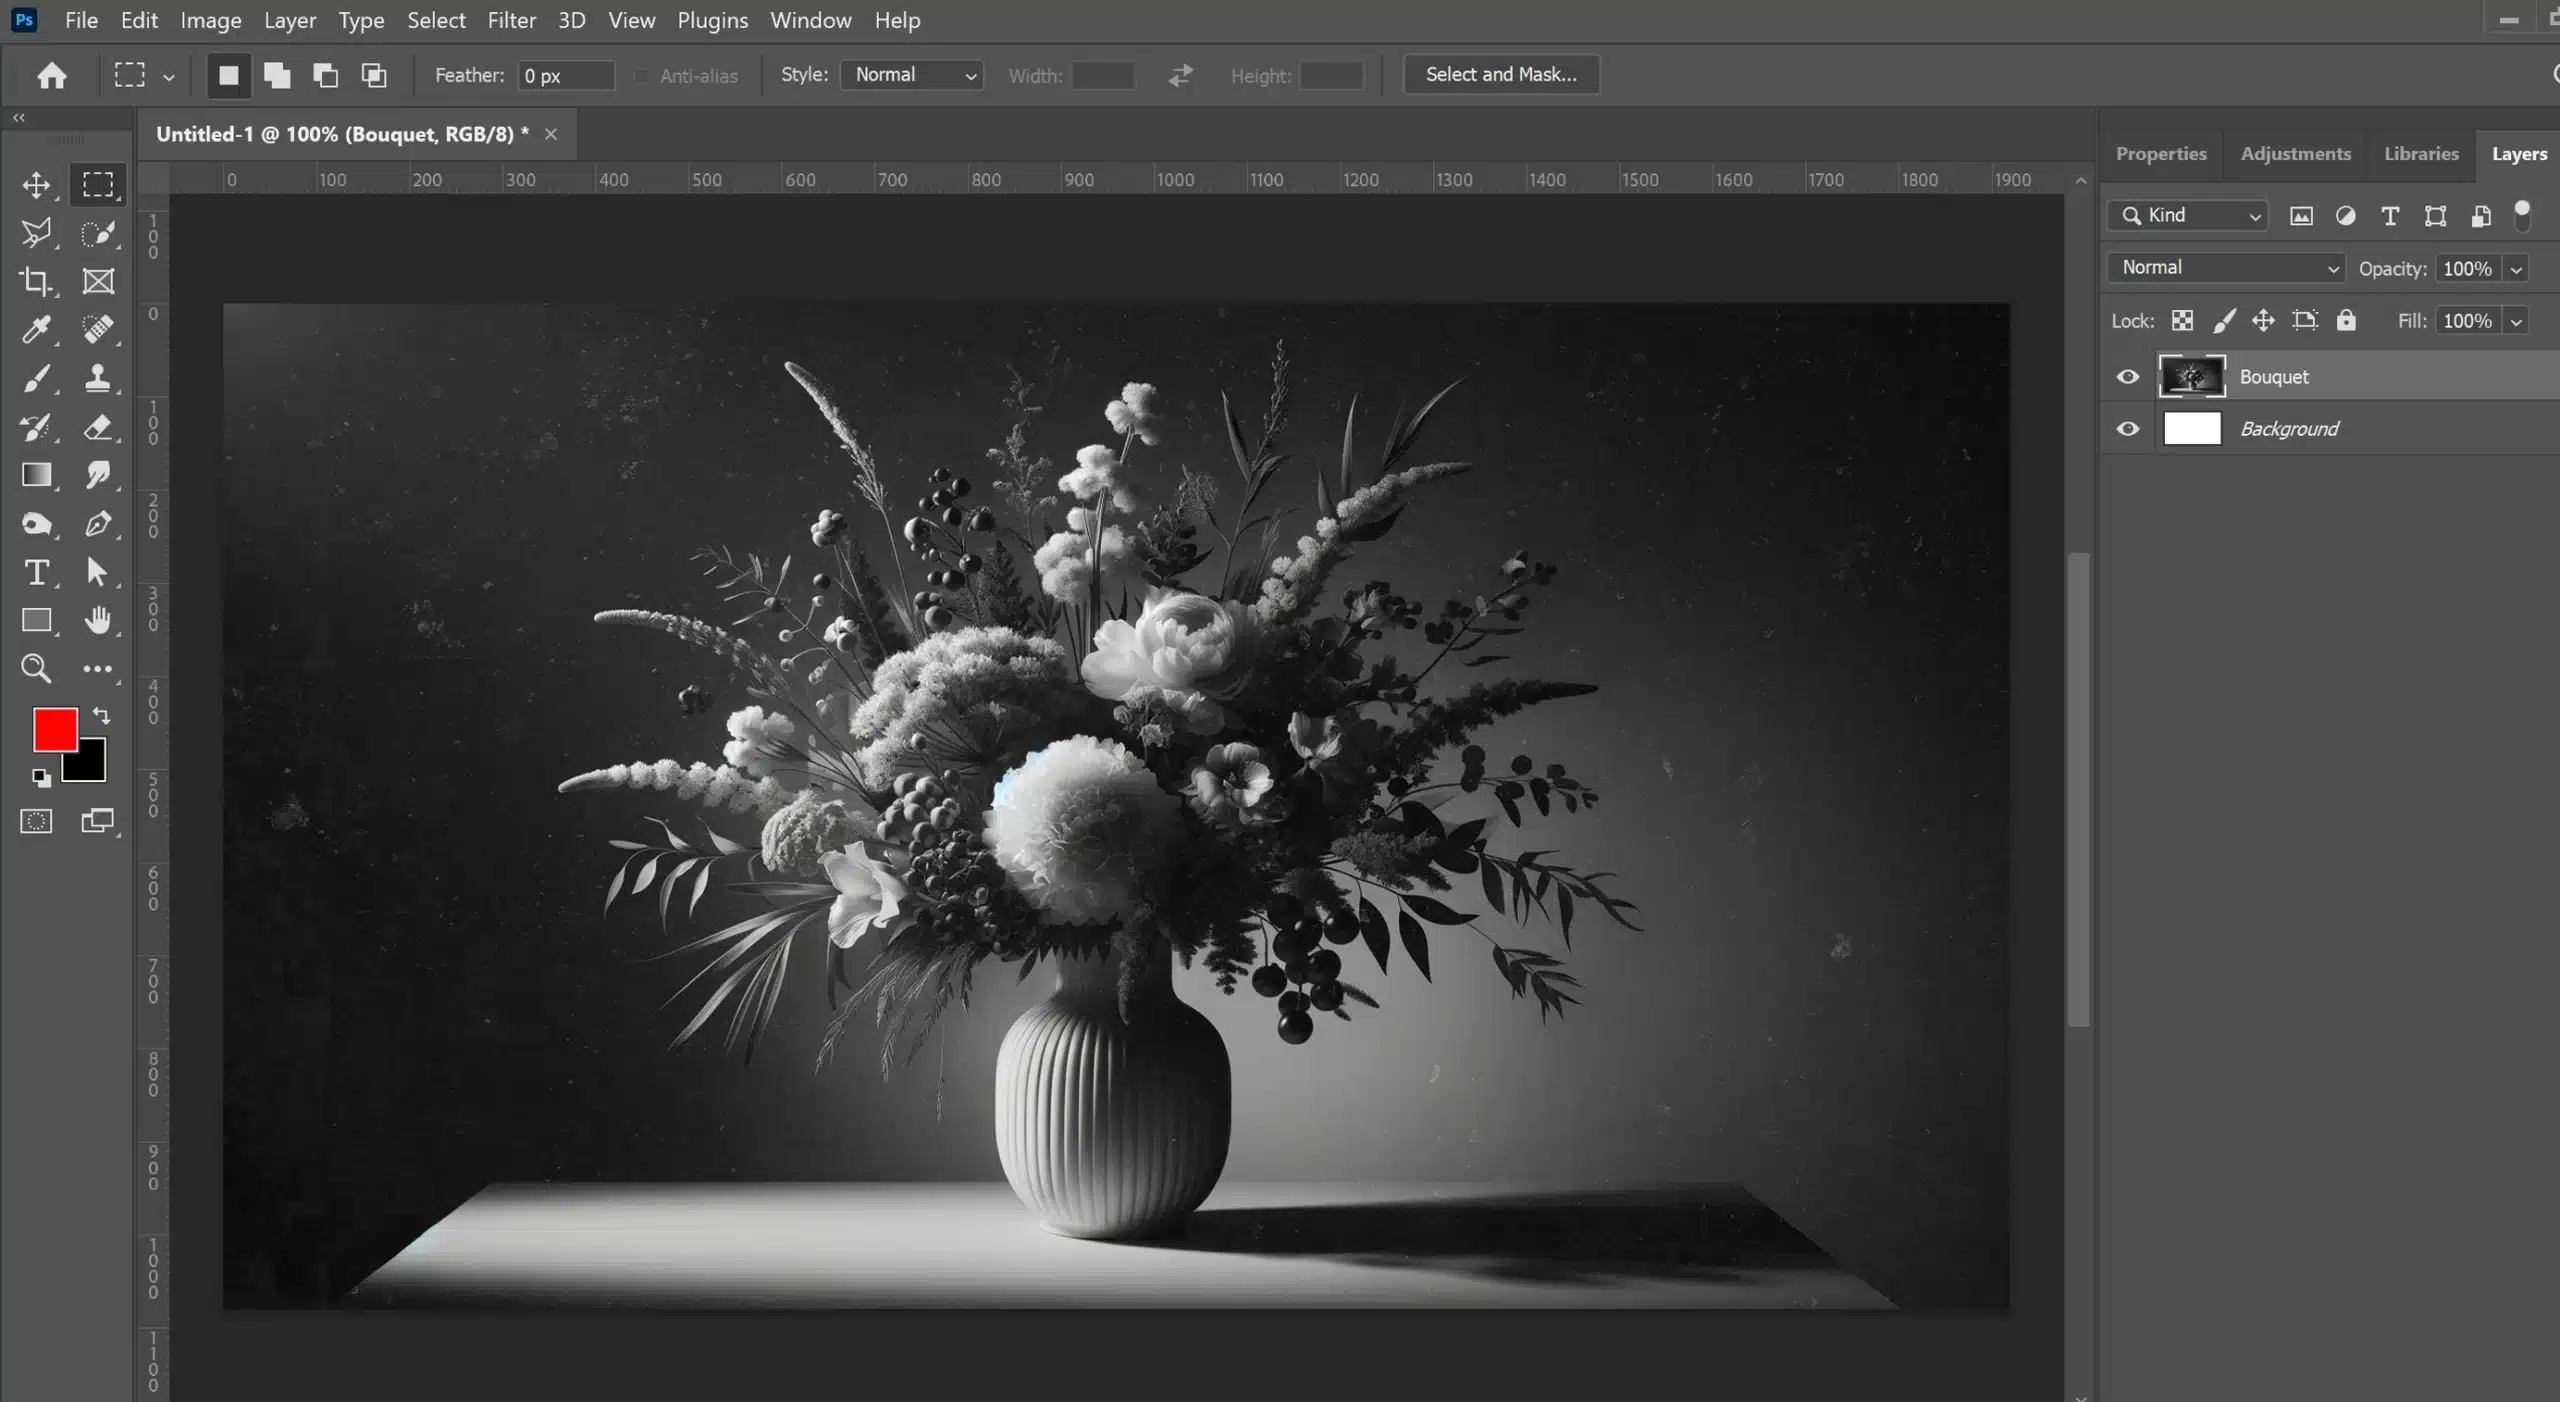 A black and white photo of a bouquet in a vase, displayed in the Adobe Photoshop interface.